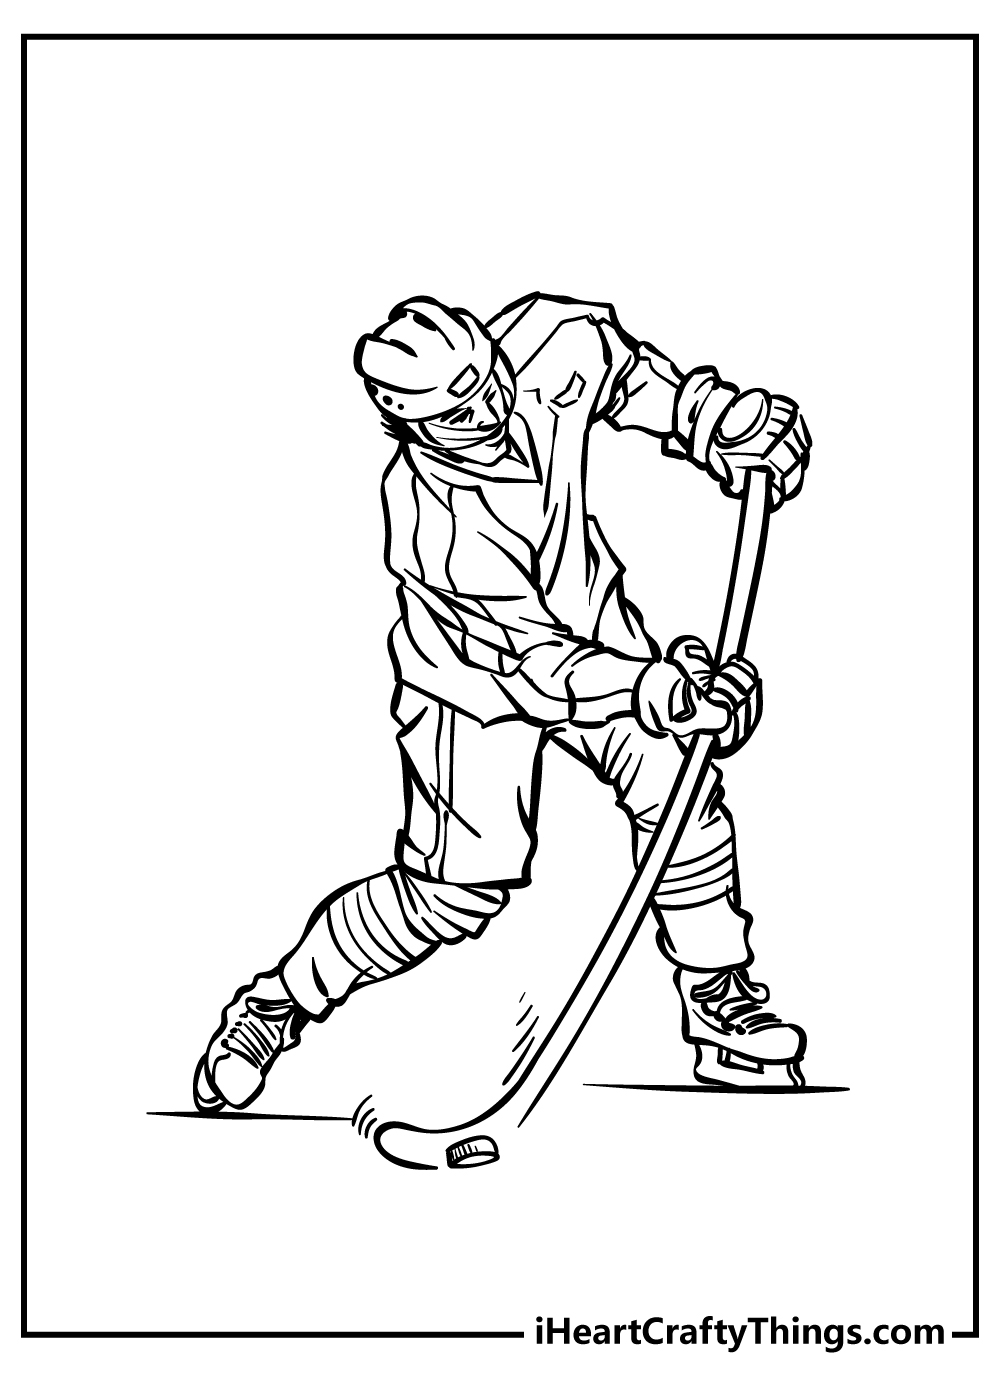 Hockey coloring pages free printables